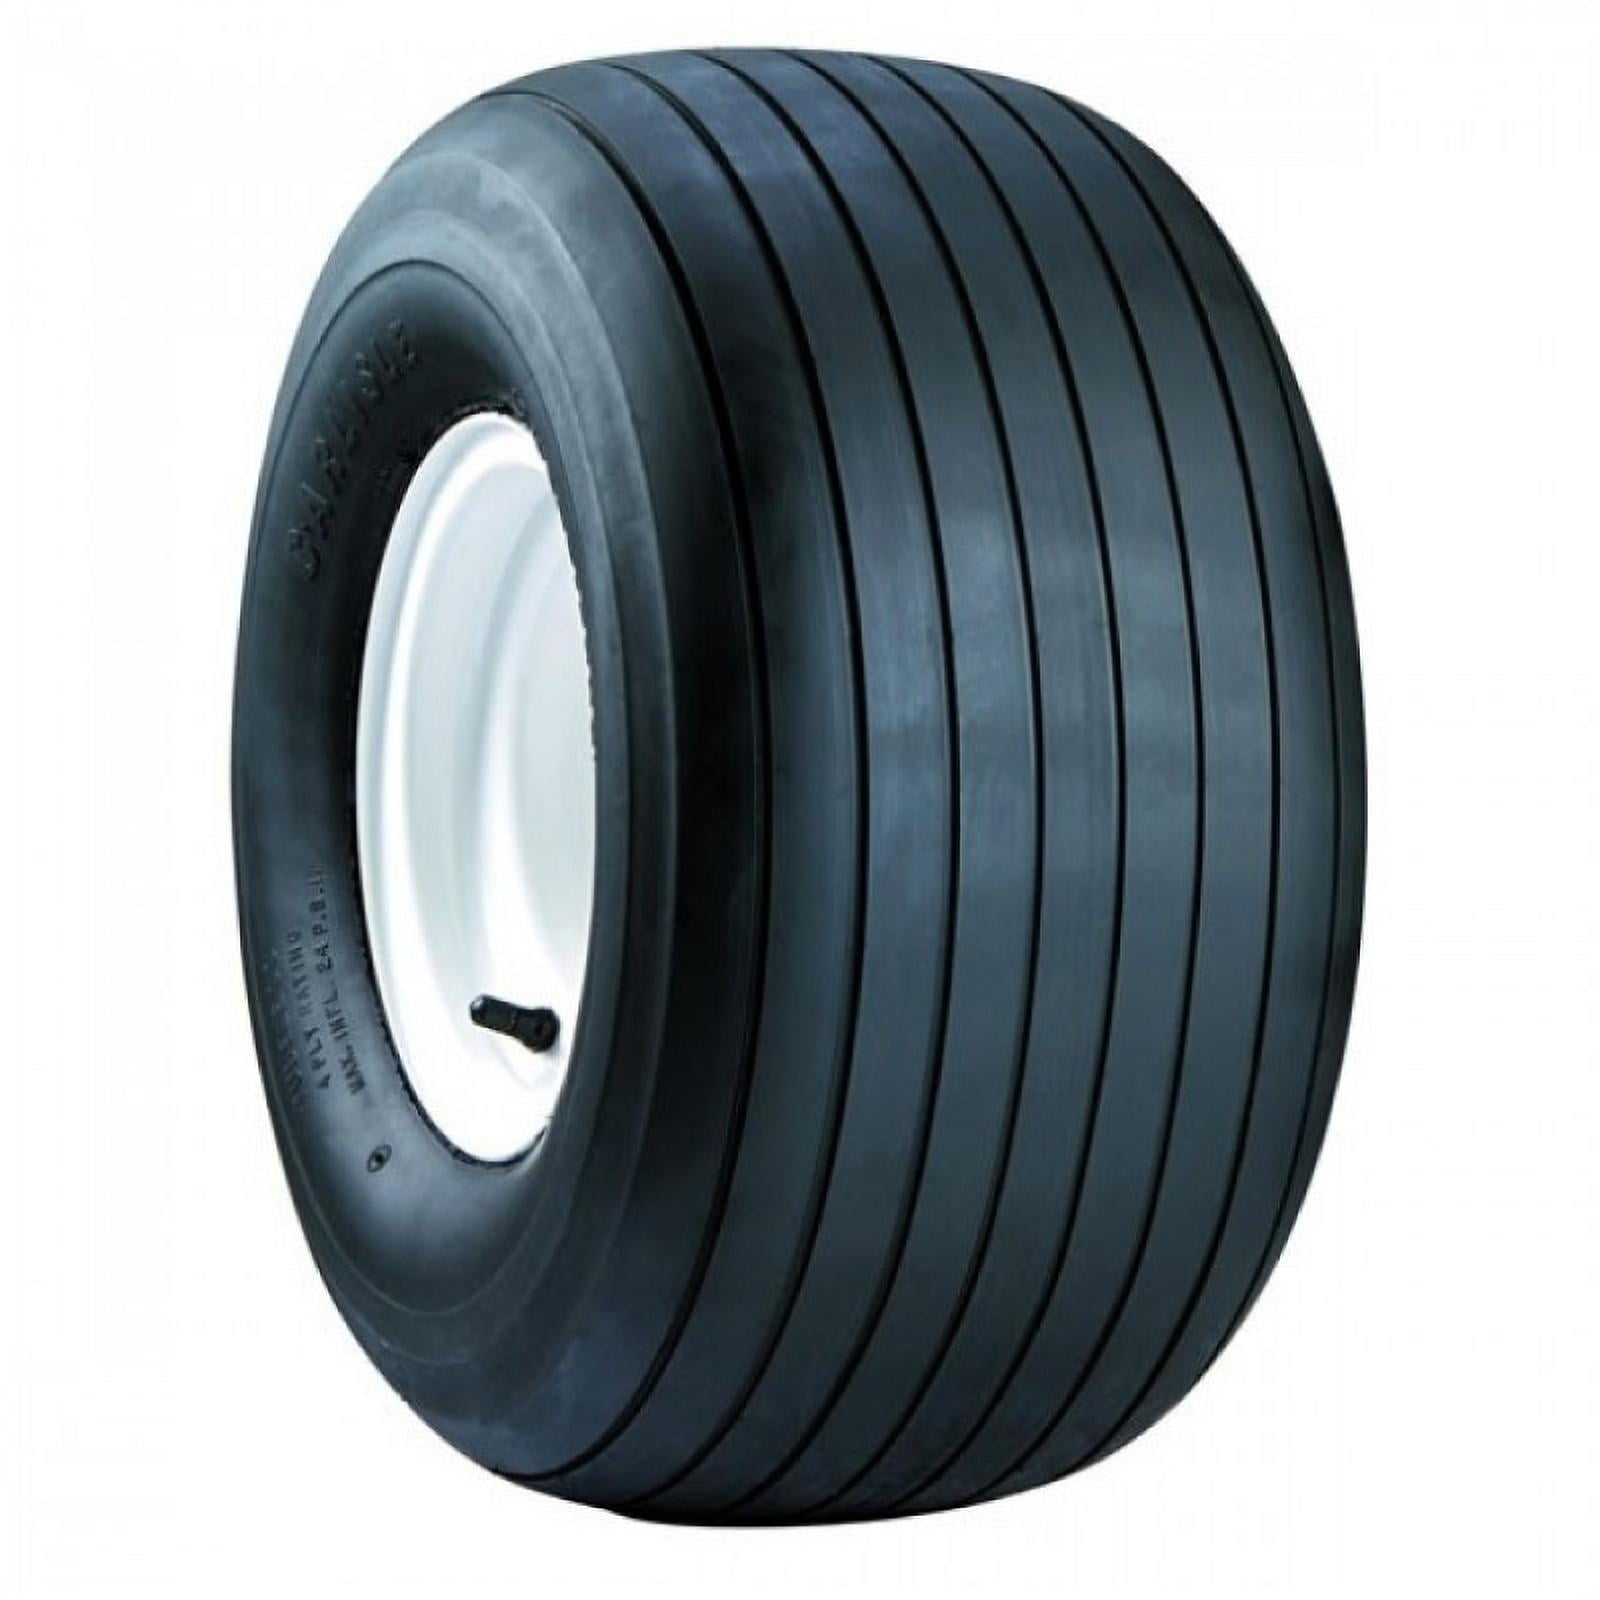 Tire Inner Tube 13x6.50x6 Straight Valve for Western Snow Blowers 13x5.00x6